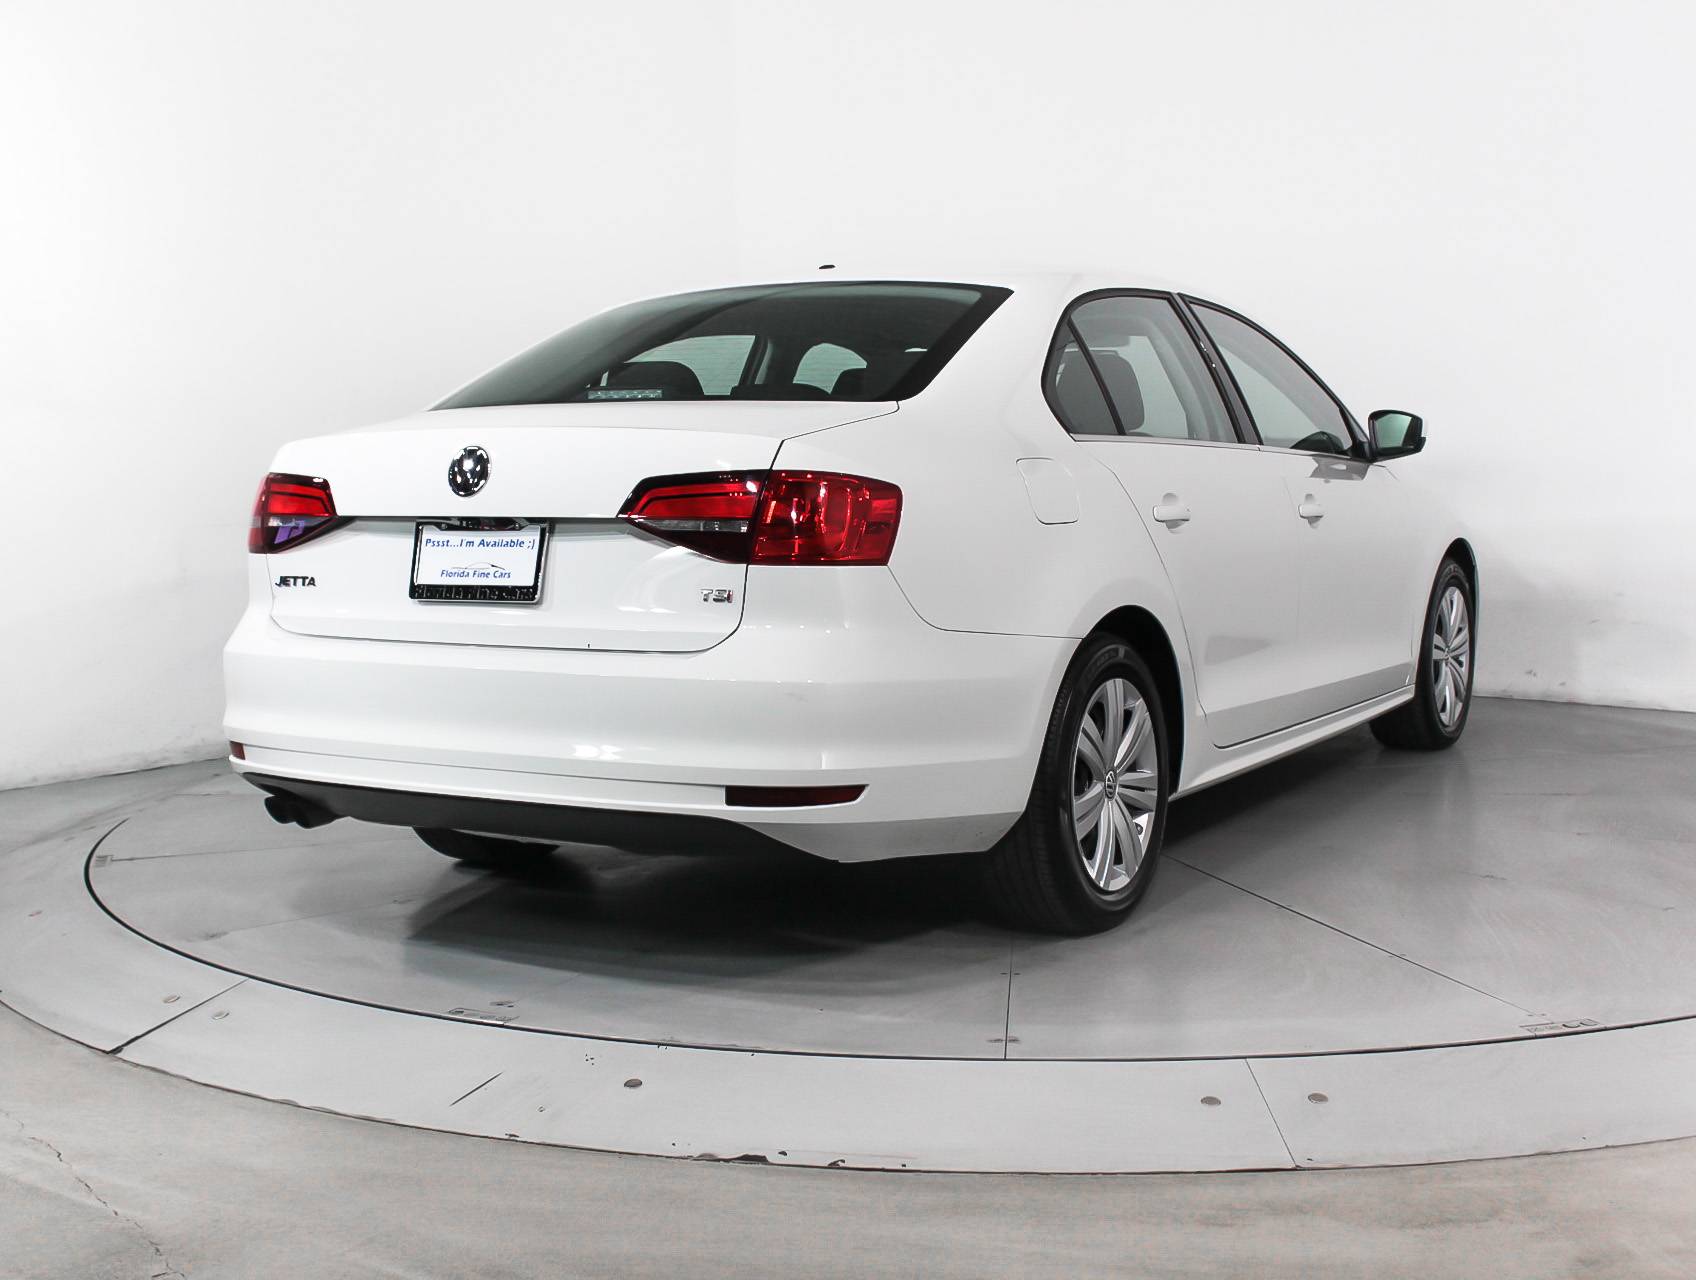 Florida Fine Cars - Used VOLKSWAGEN JETTA 2017 HOLLYWOOD 1.4T S